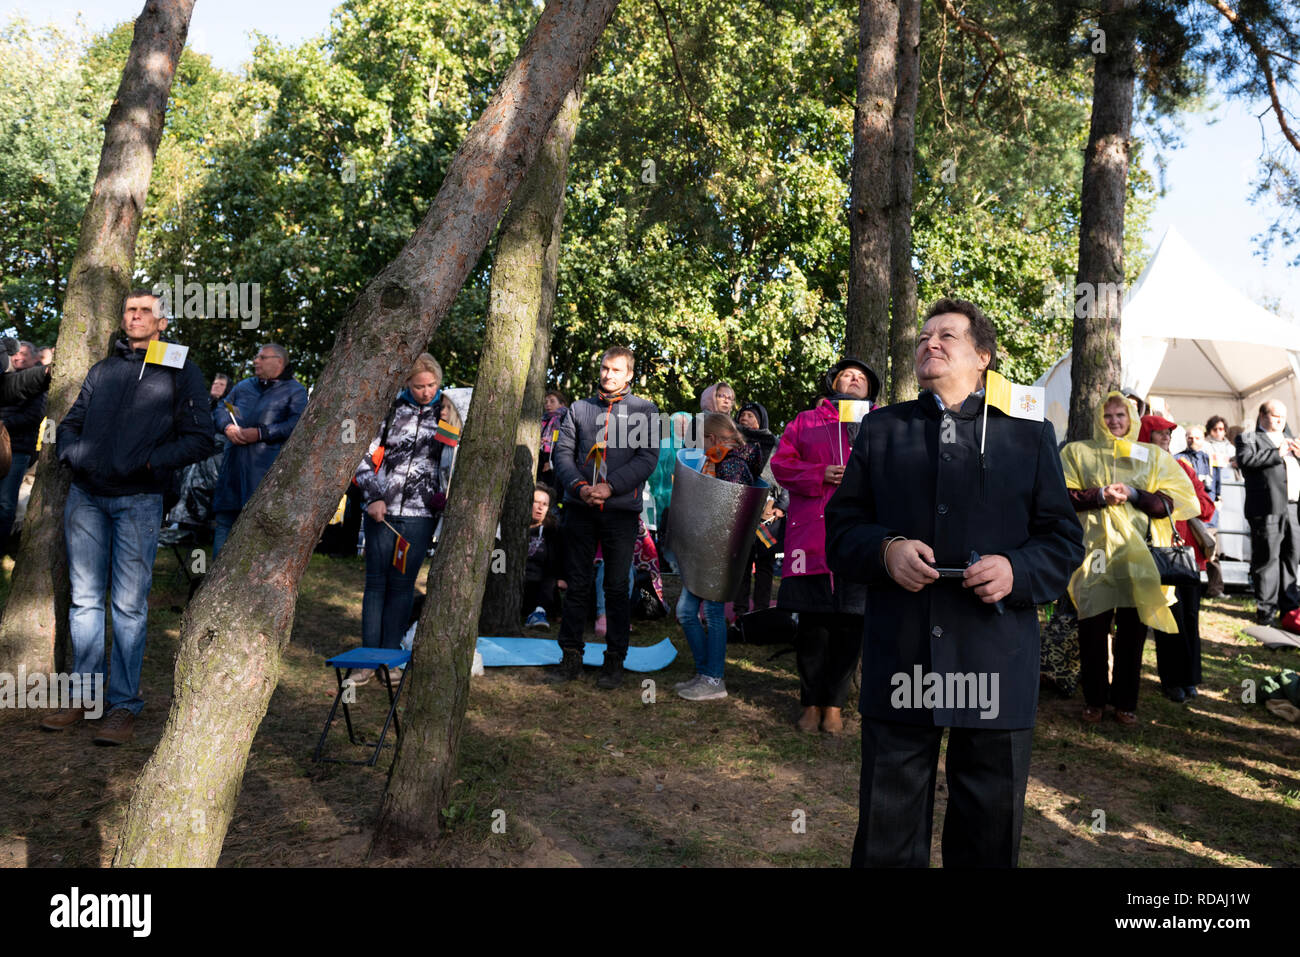 Pope Francis visit to Lithuania at the Santakos Park in Kaunas, Lithuania. Stock Photo